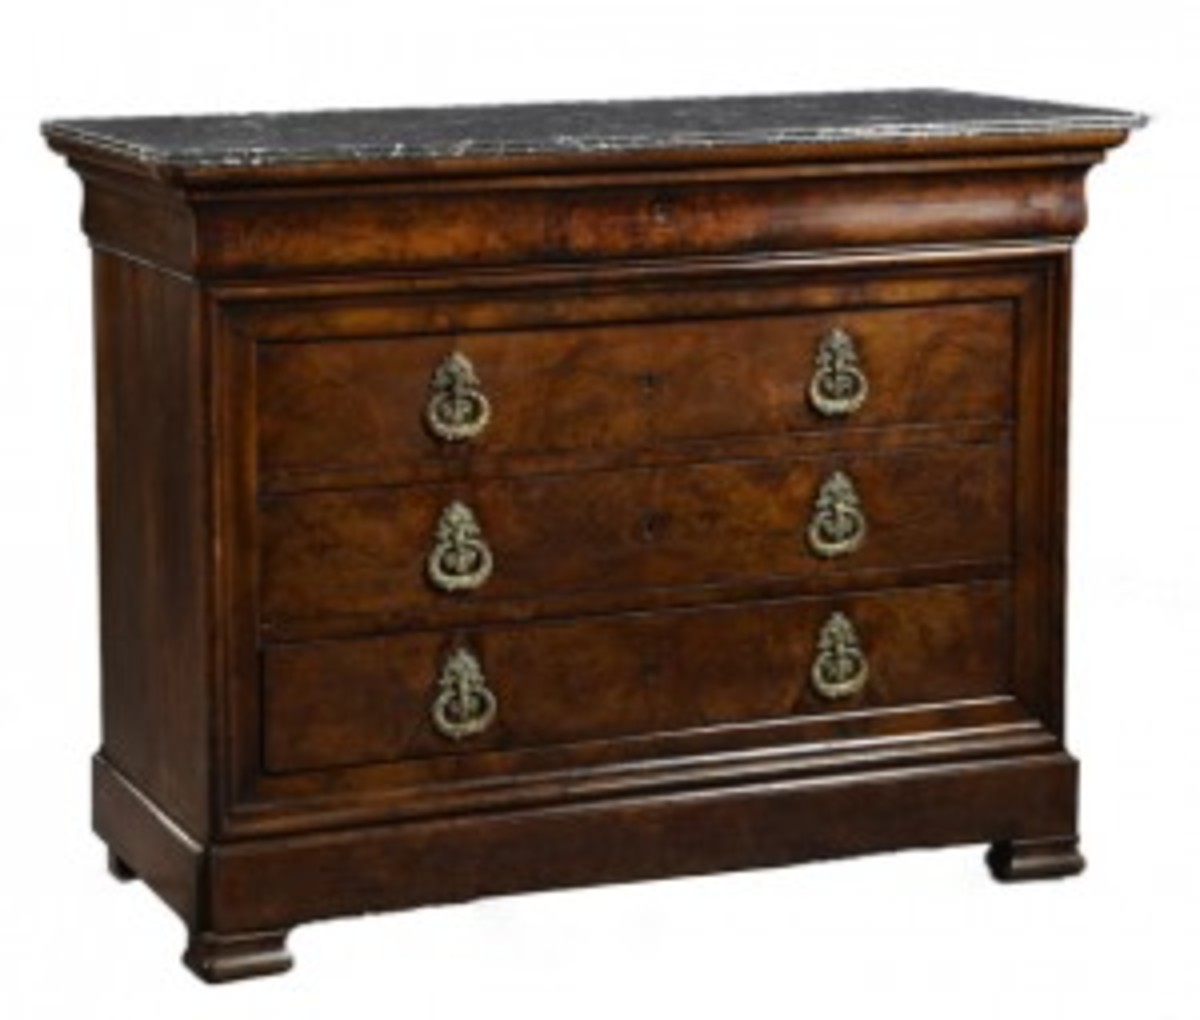 Carved walnut marble-top commode